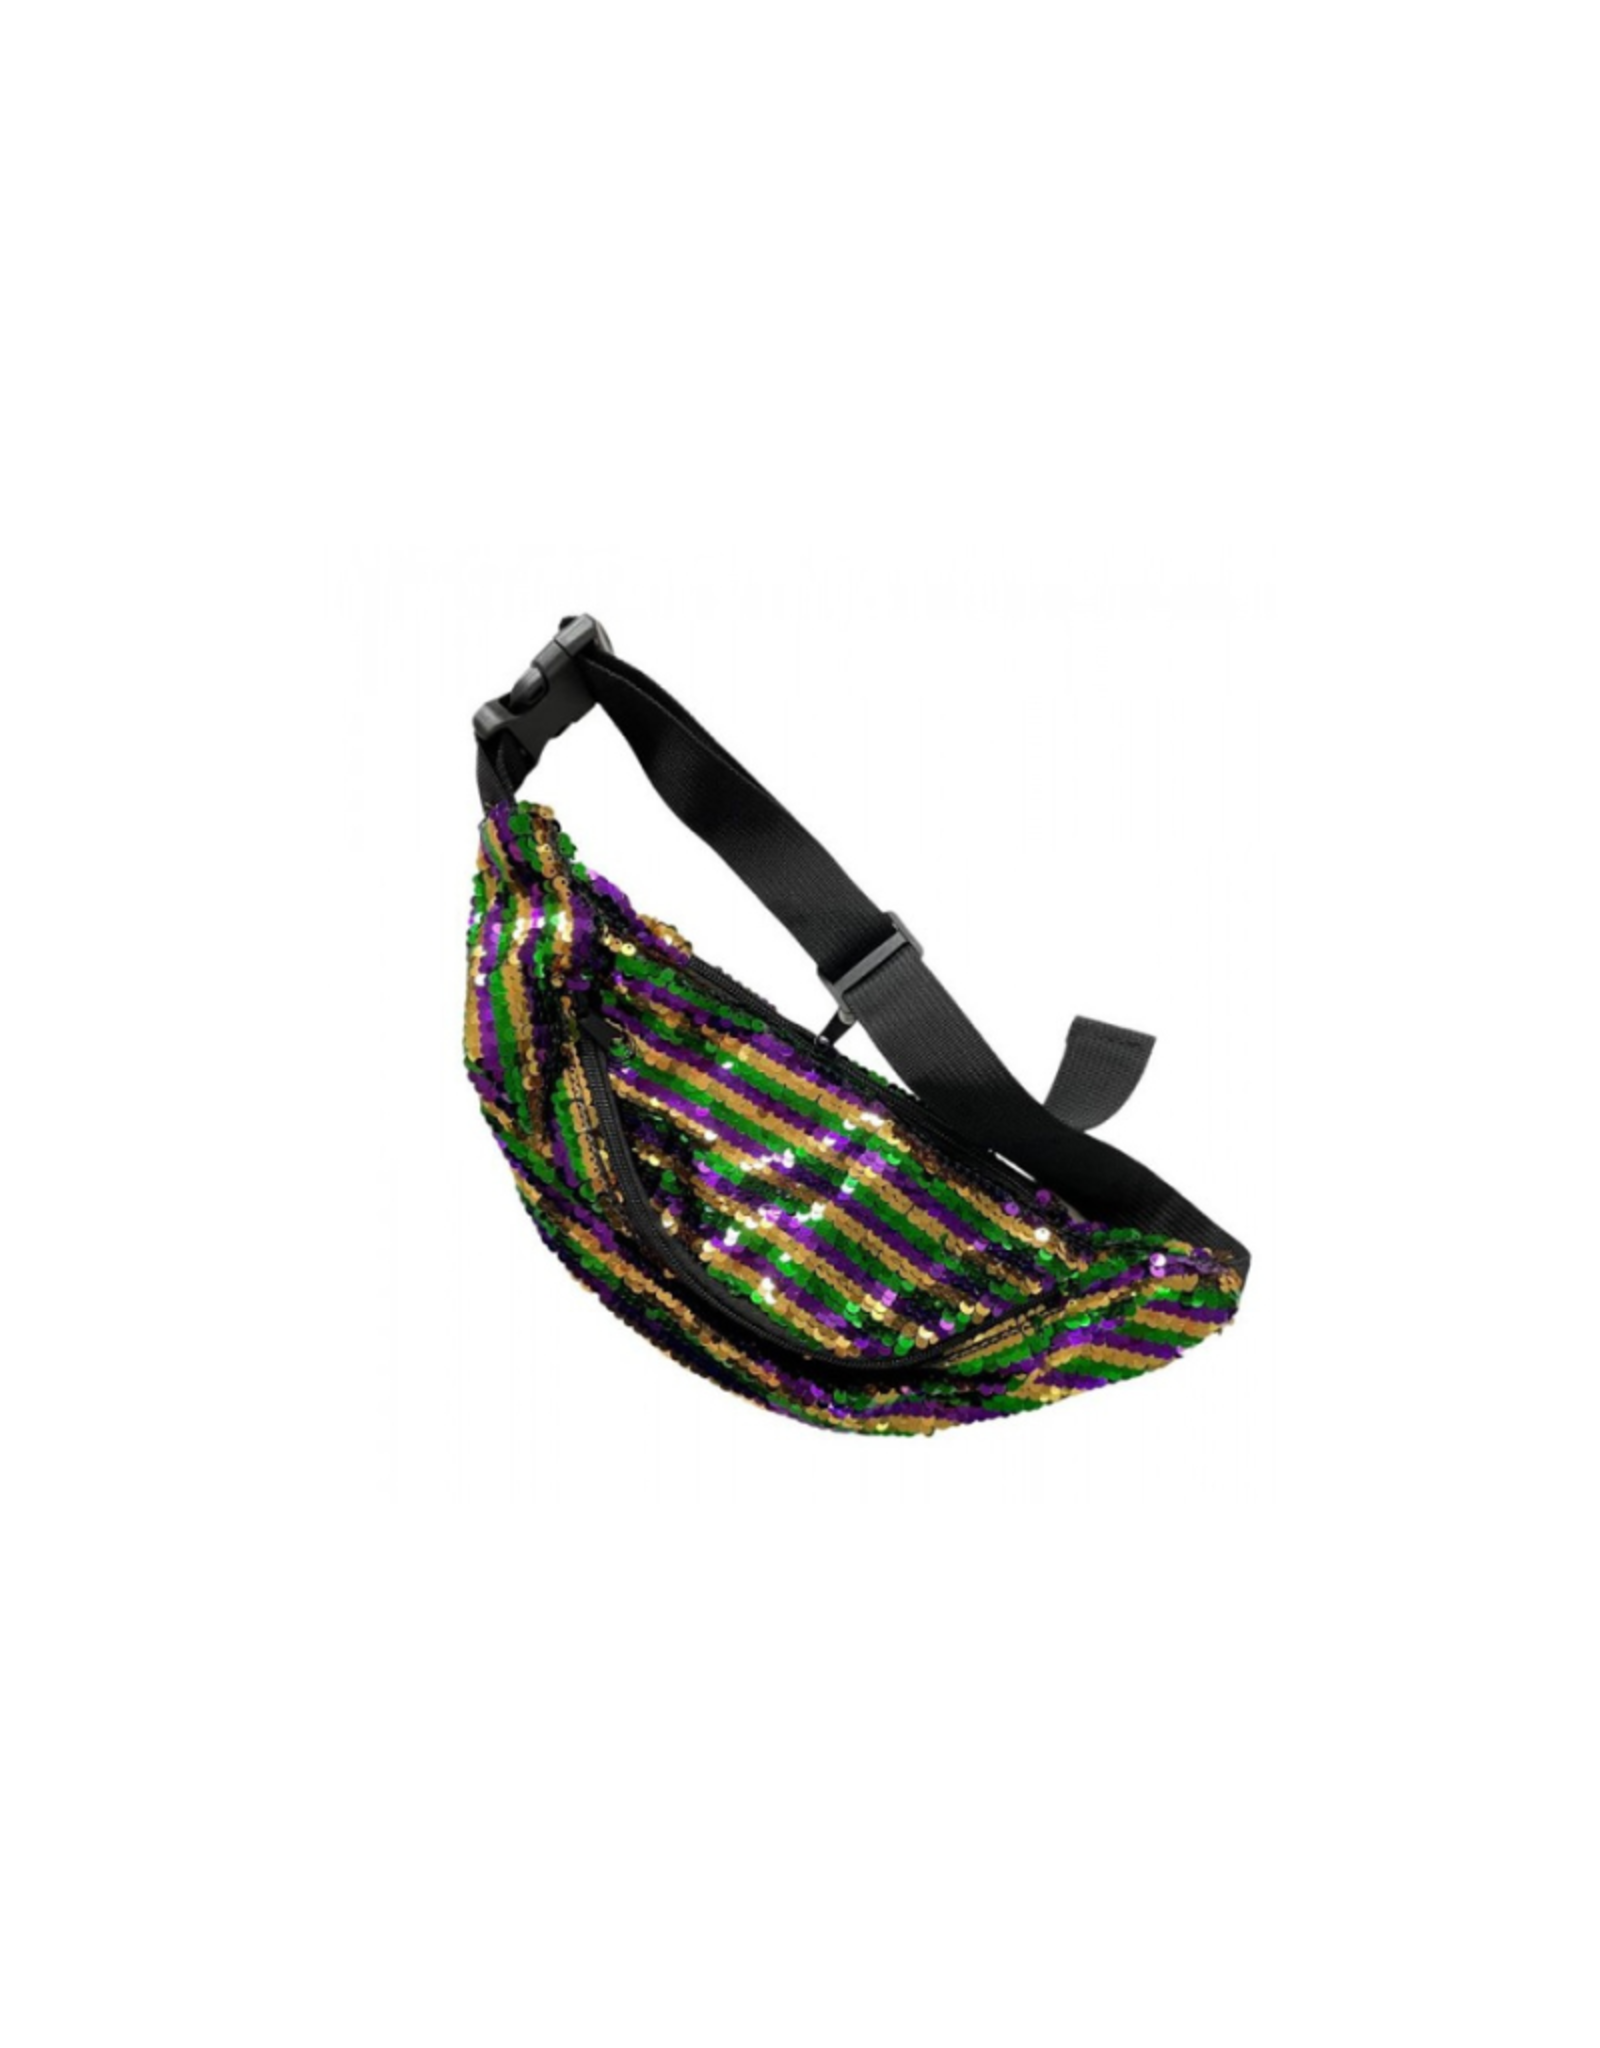 KBW Global Corp BAG-FANNY PACK SEQUIN